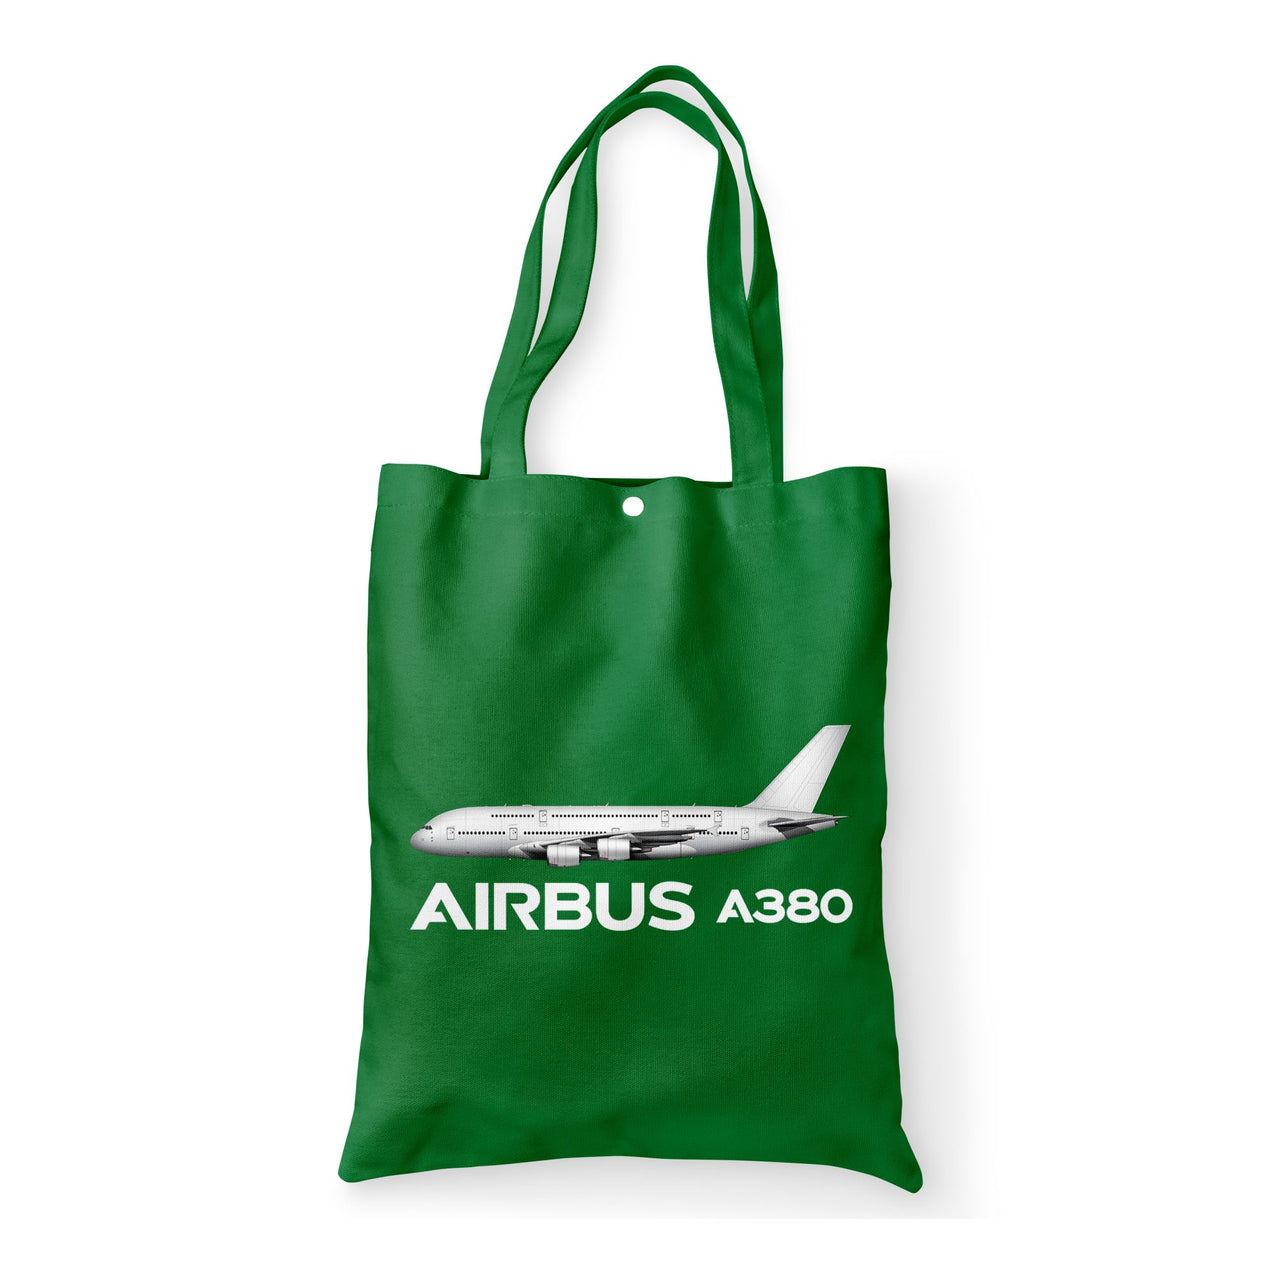 The Airbus A380 Designed Tote Bags